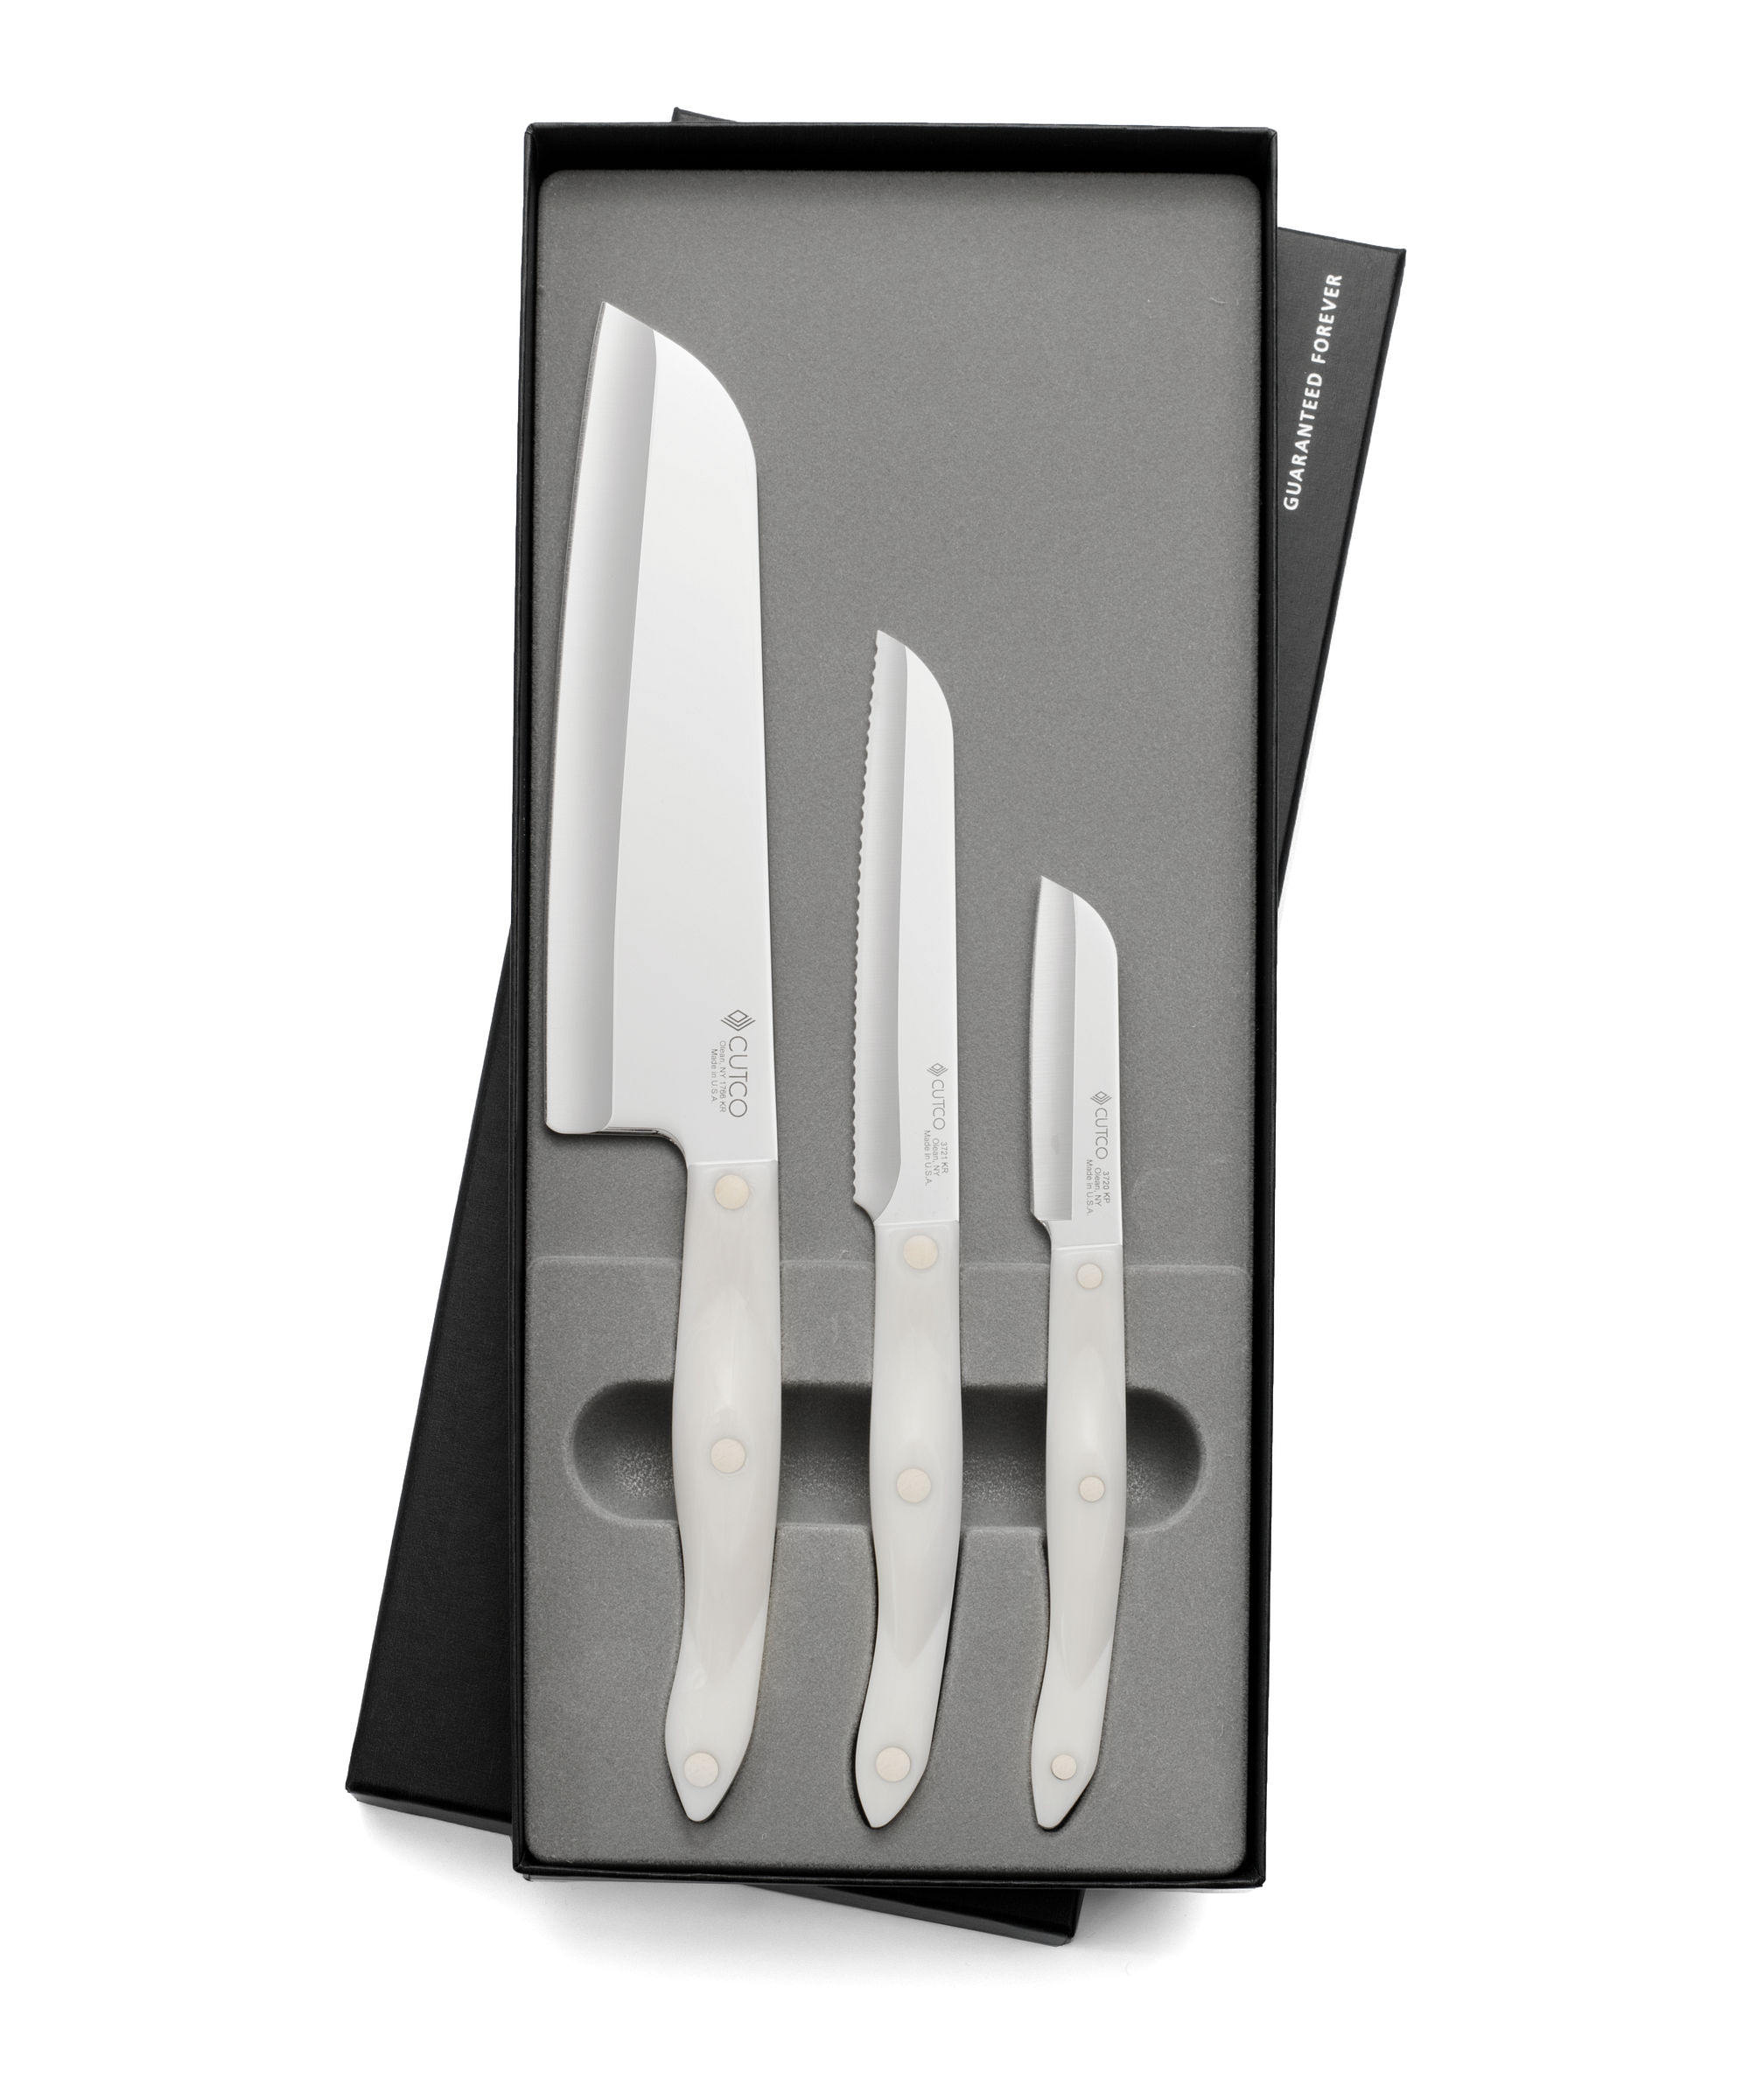  CUTCO Model 1847 Space Saver set includes 5 High Carbon  Stainless knives, all in factory-sealed plastic bags.set also includes  Honey Finish Oak Block, Sharpener, and 8 x12 Poly Prep Cutting